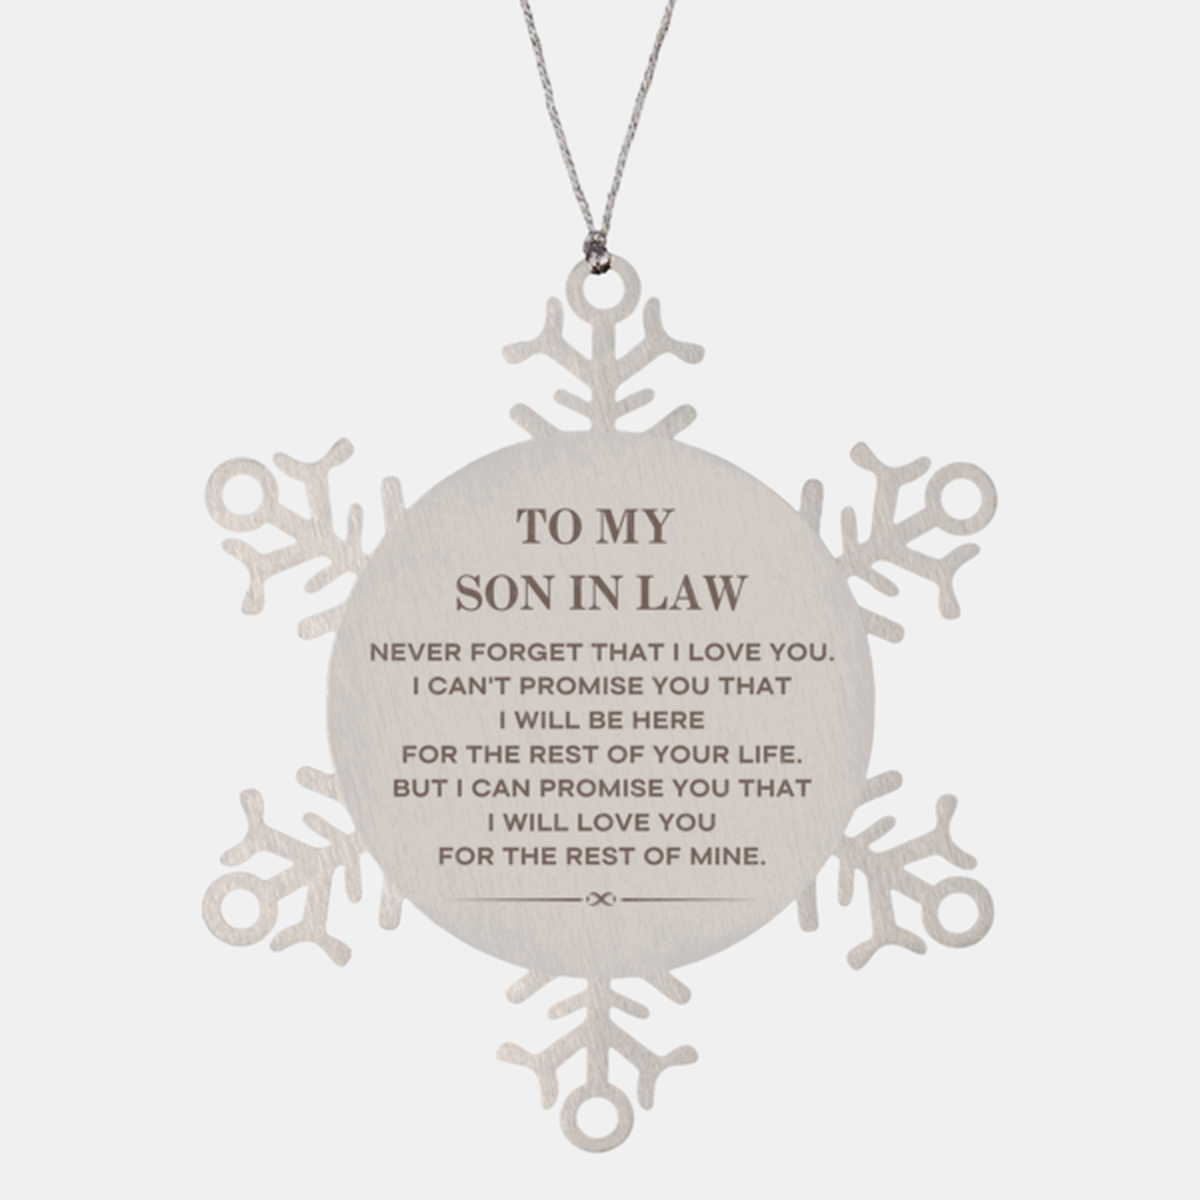 To My Son In Law Gifts, I will love you for the rest of mine, Love Son In Law Ornament, Birthday Christmas Unique Snowflake Ornament For Son In Law